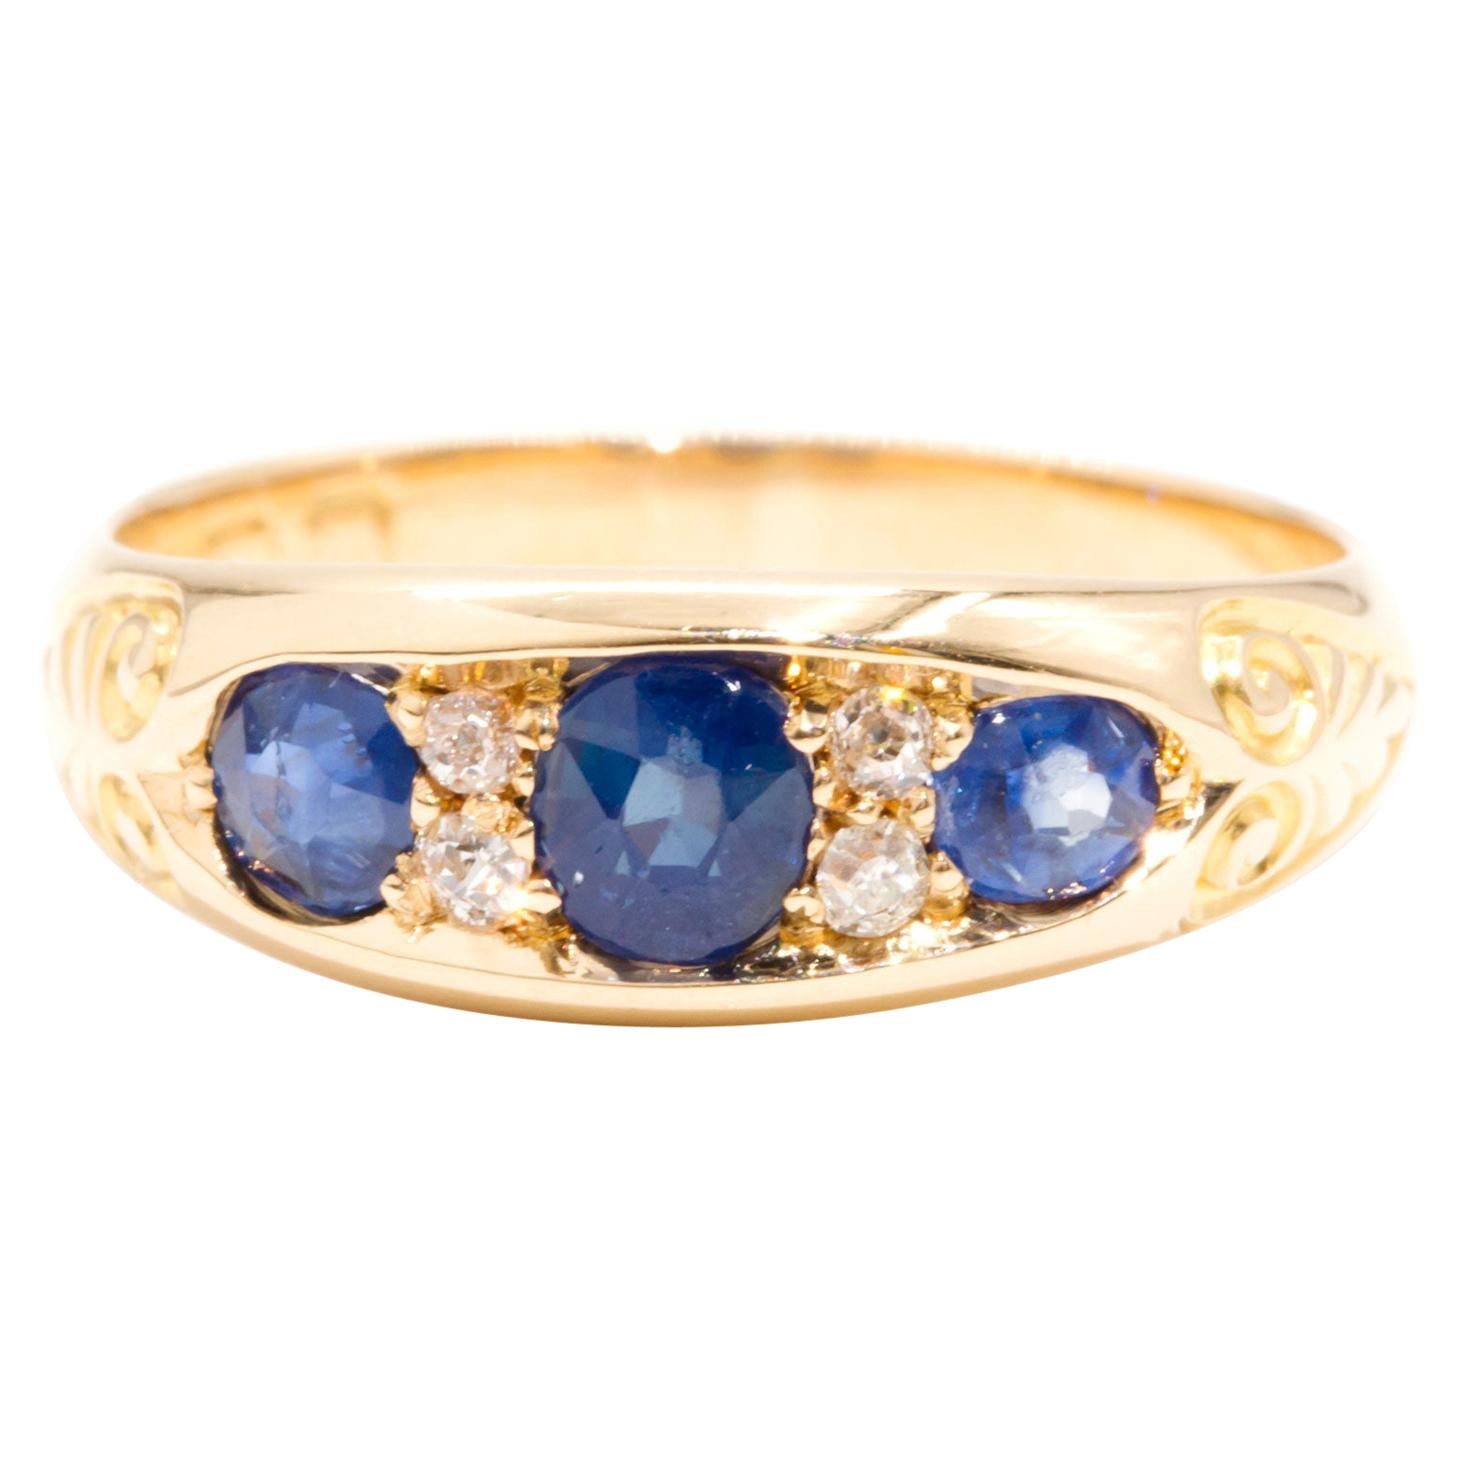 Old European Cut Diamond and Blue Sapphire 18 Carat Yellow Gold Vintage Ring 